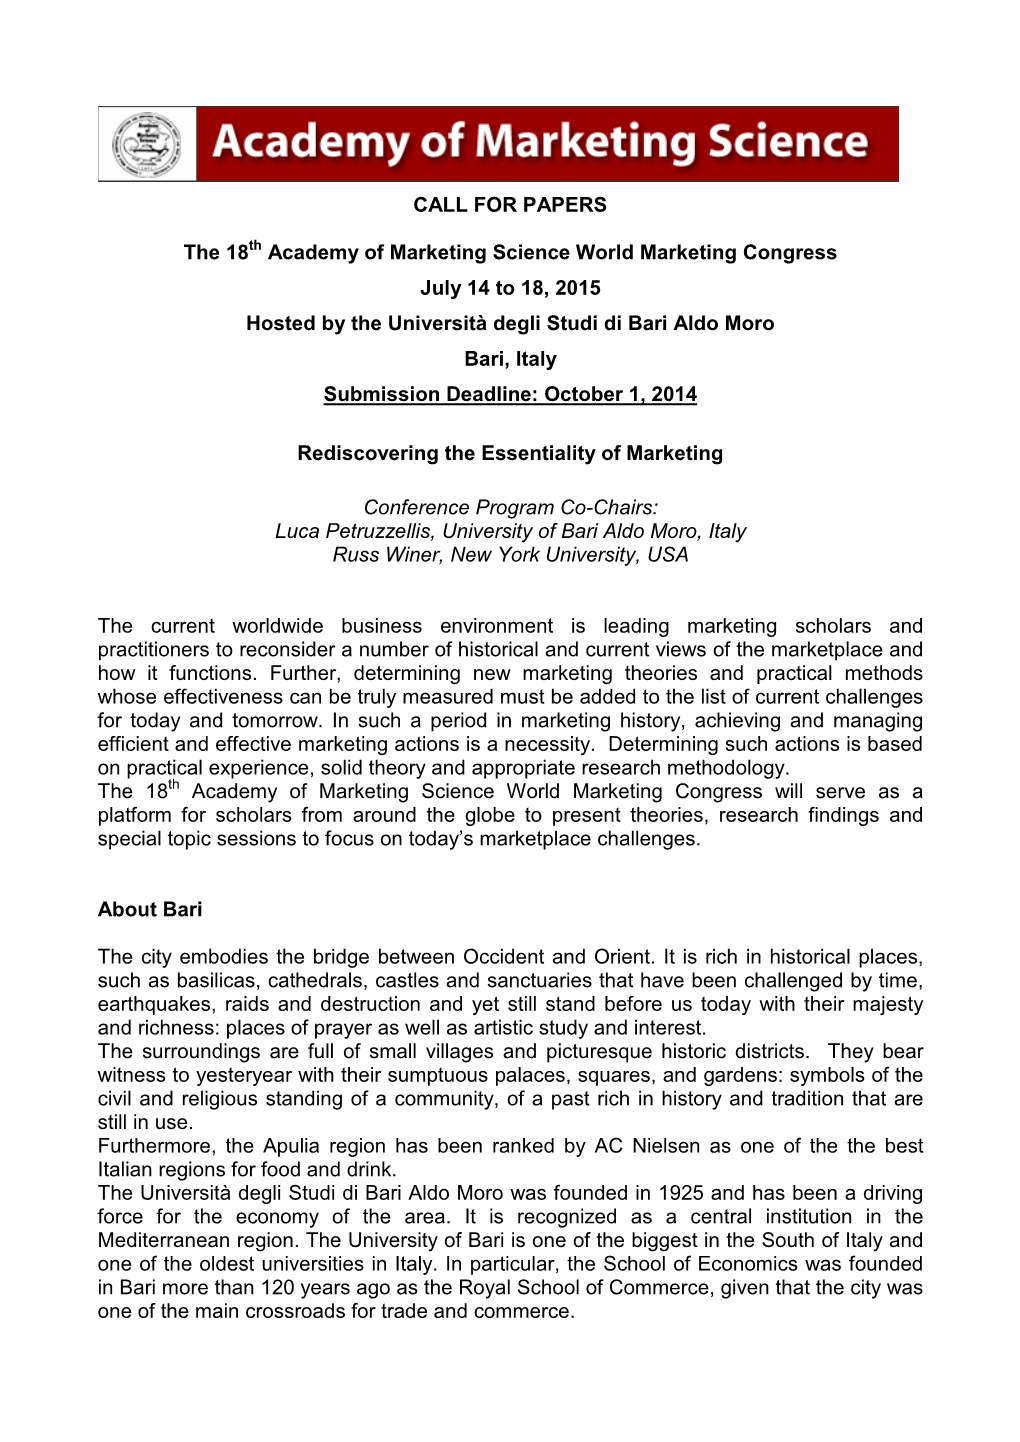 CALL for PAPERS the 18 Academy of Marketing Science World